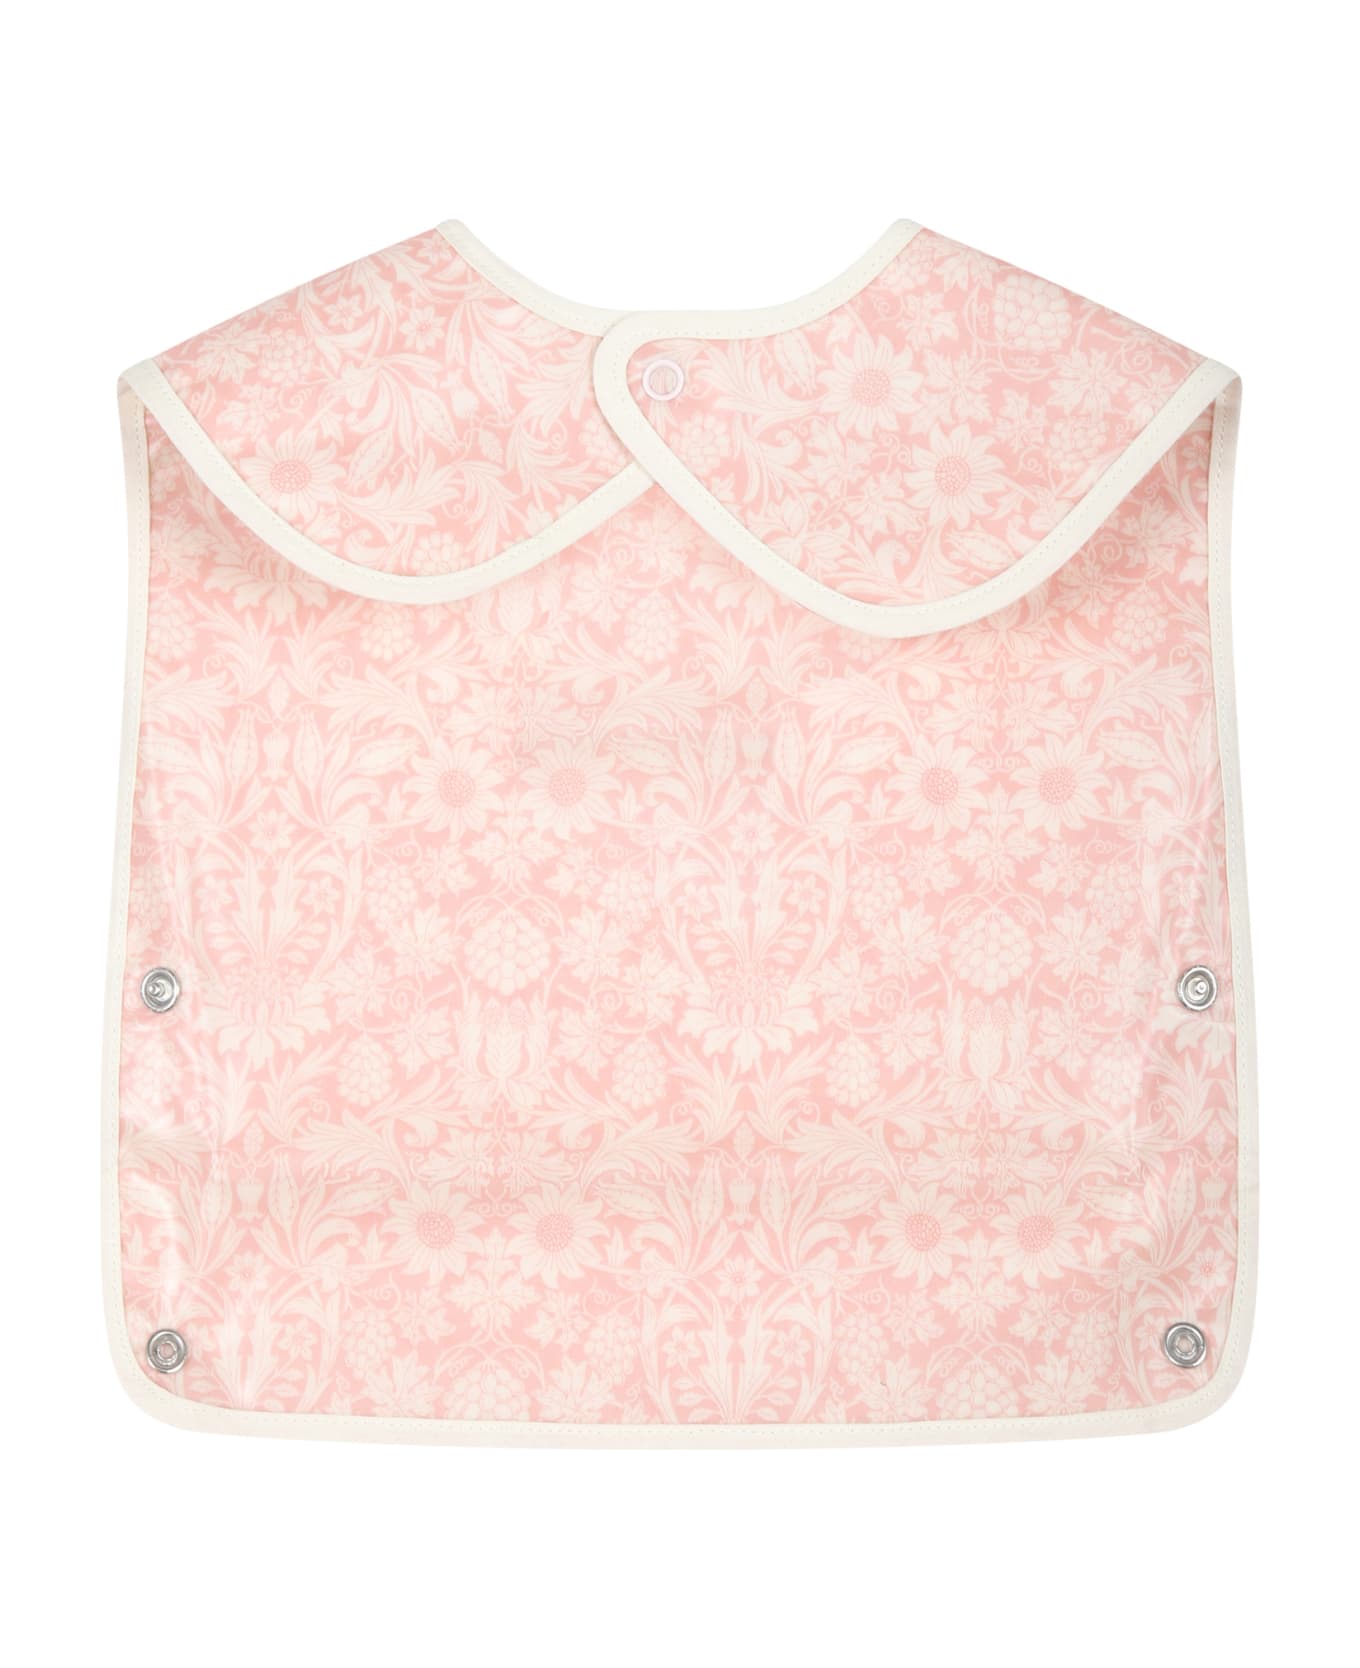 Bonpoint Pink Bib For Baby Girl With Flower Print - Pink アクセサリー＆ギフト